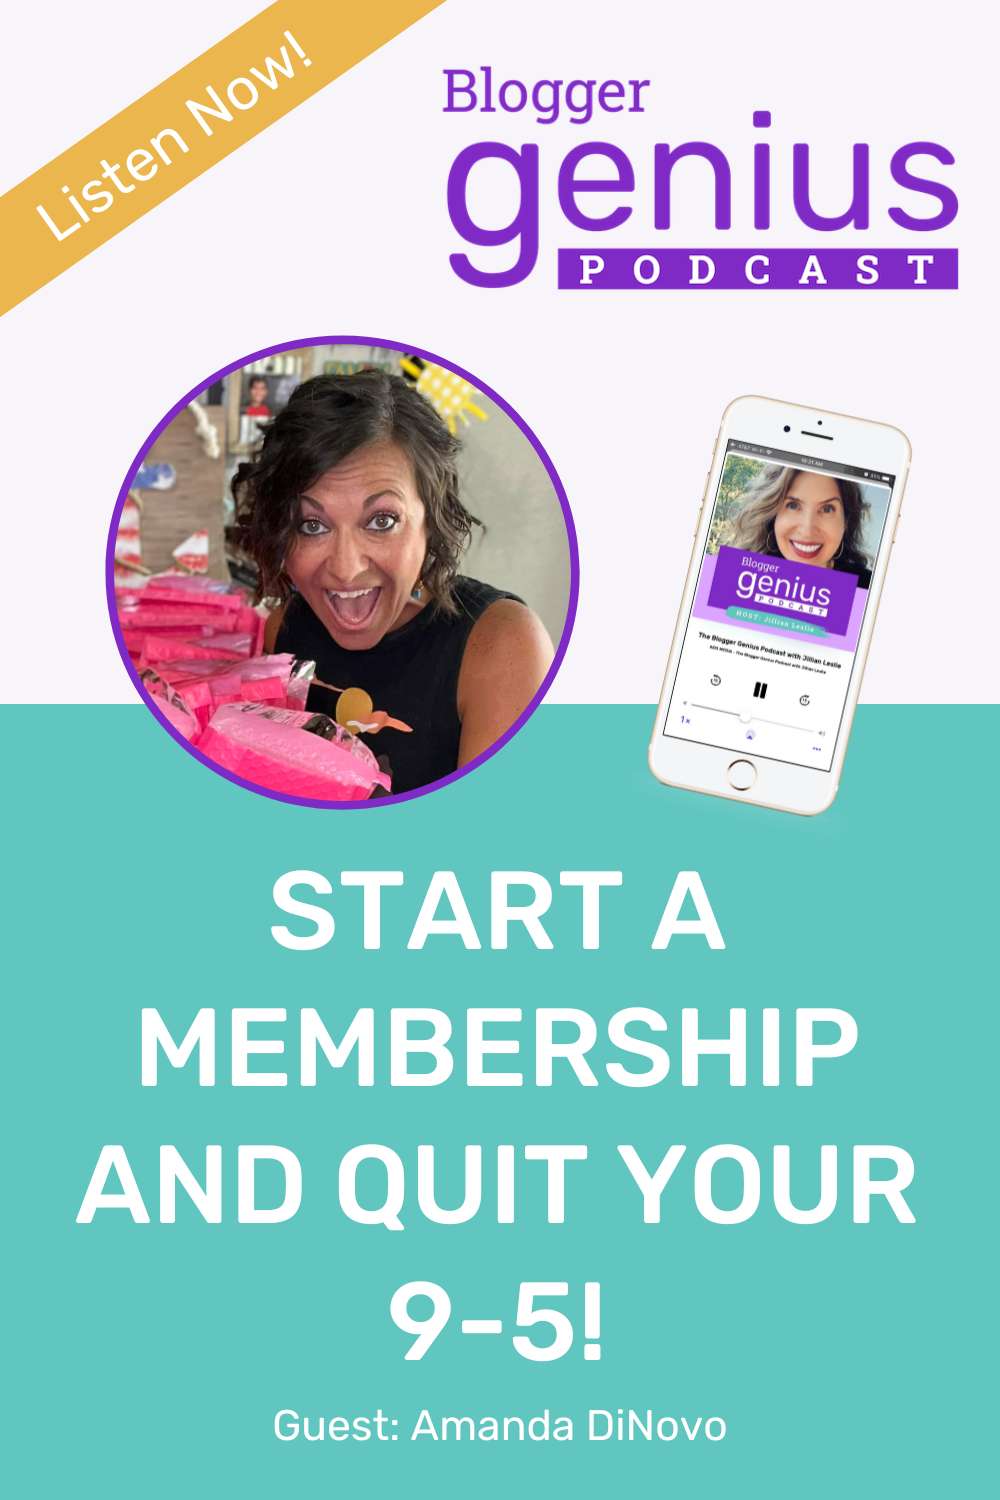 Start a Membership and Quit Your 9-5 | The Blogger Genius Podcast with Jillian Leslie